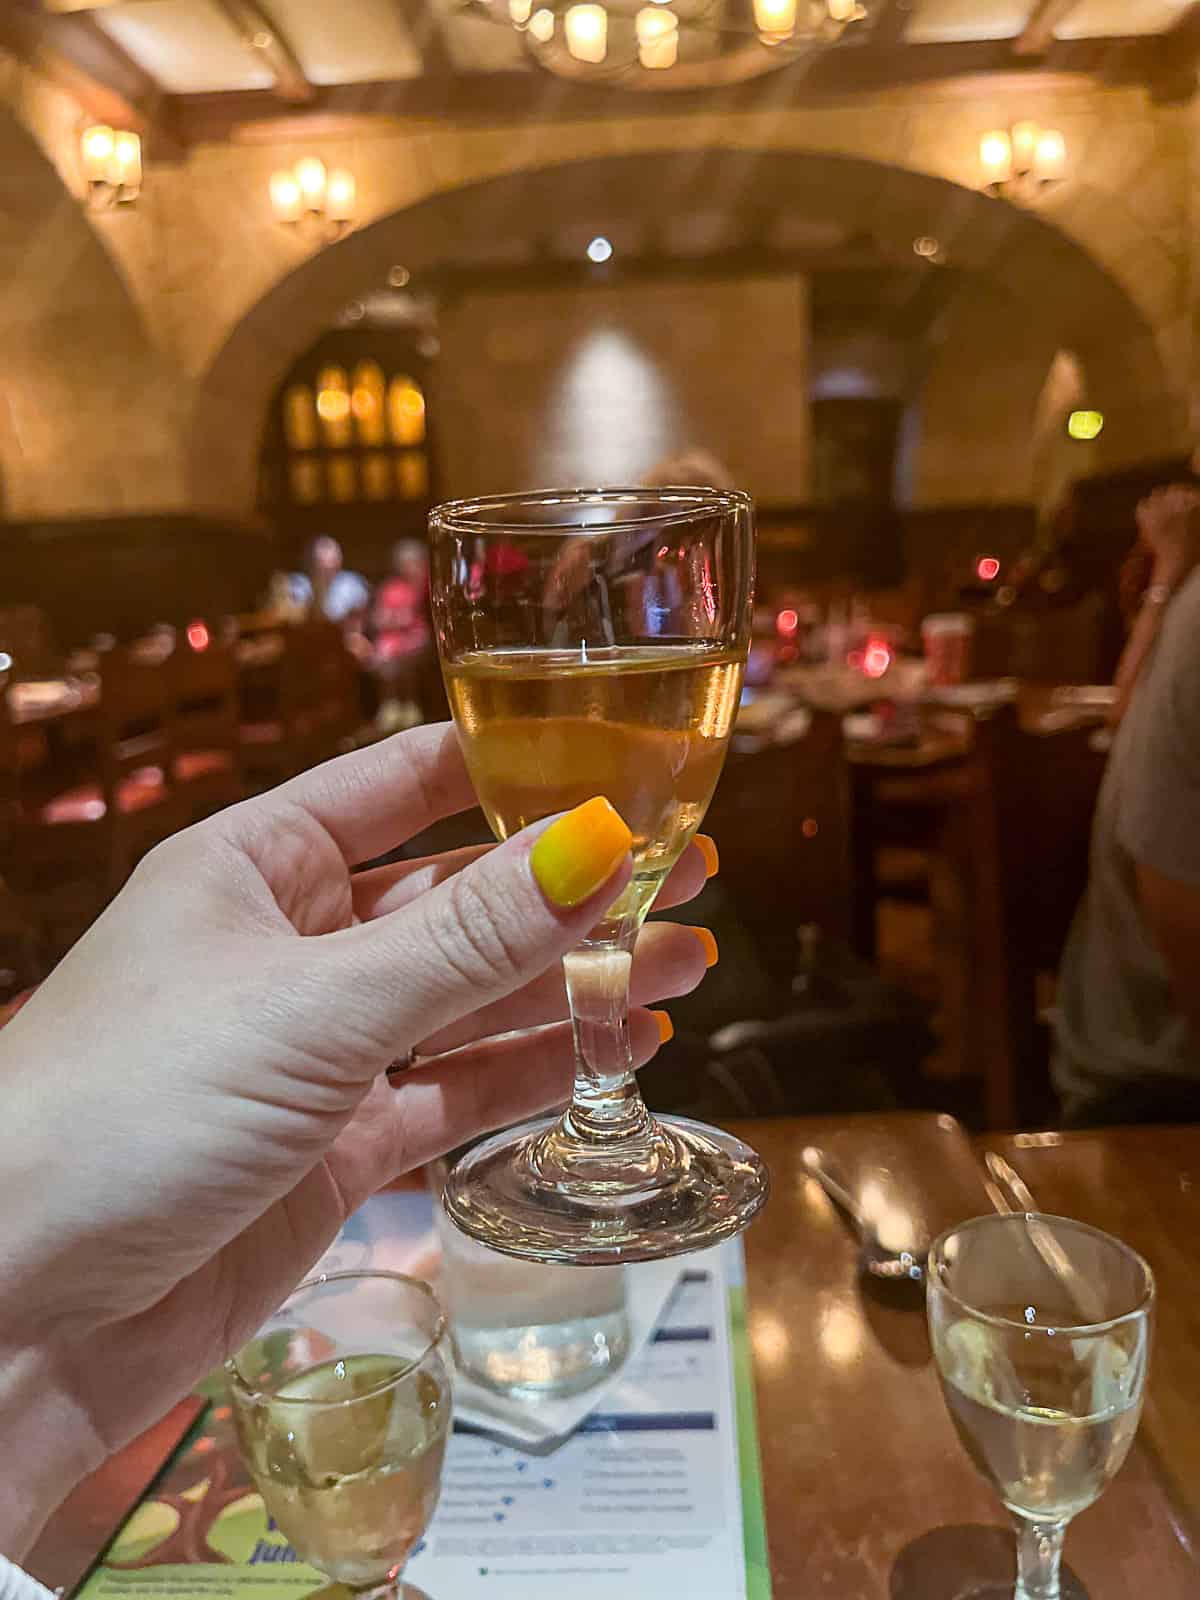 Holding Ice Wine from Disney World foodie restaurant Le Cellier in Canada Pavilion